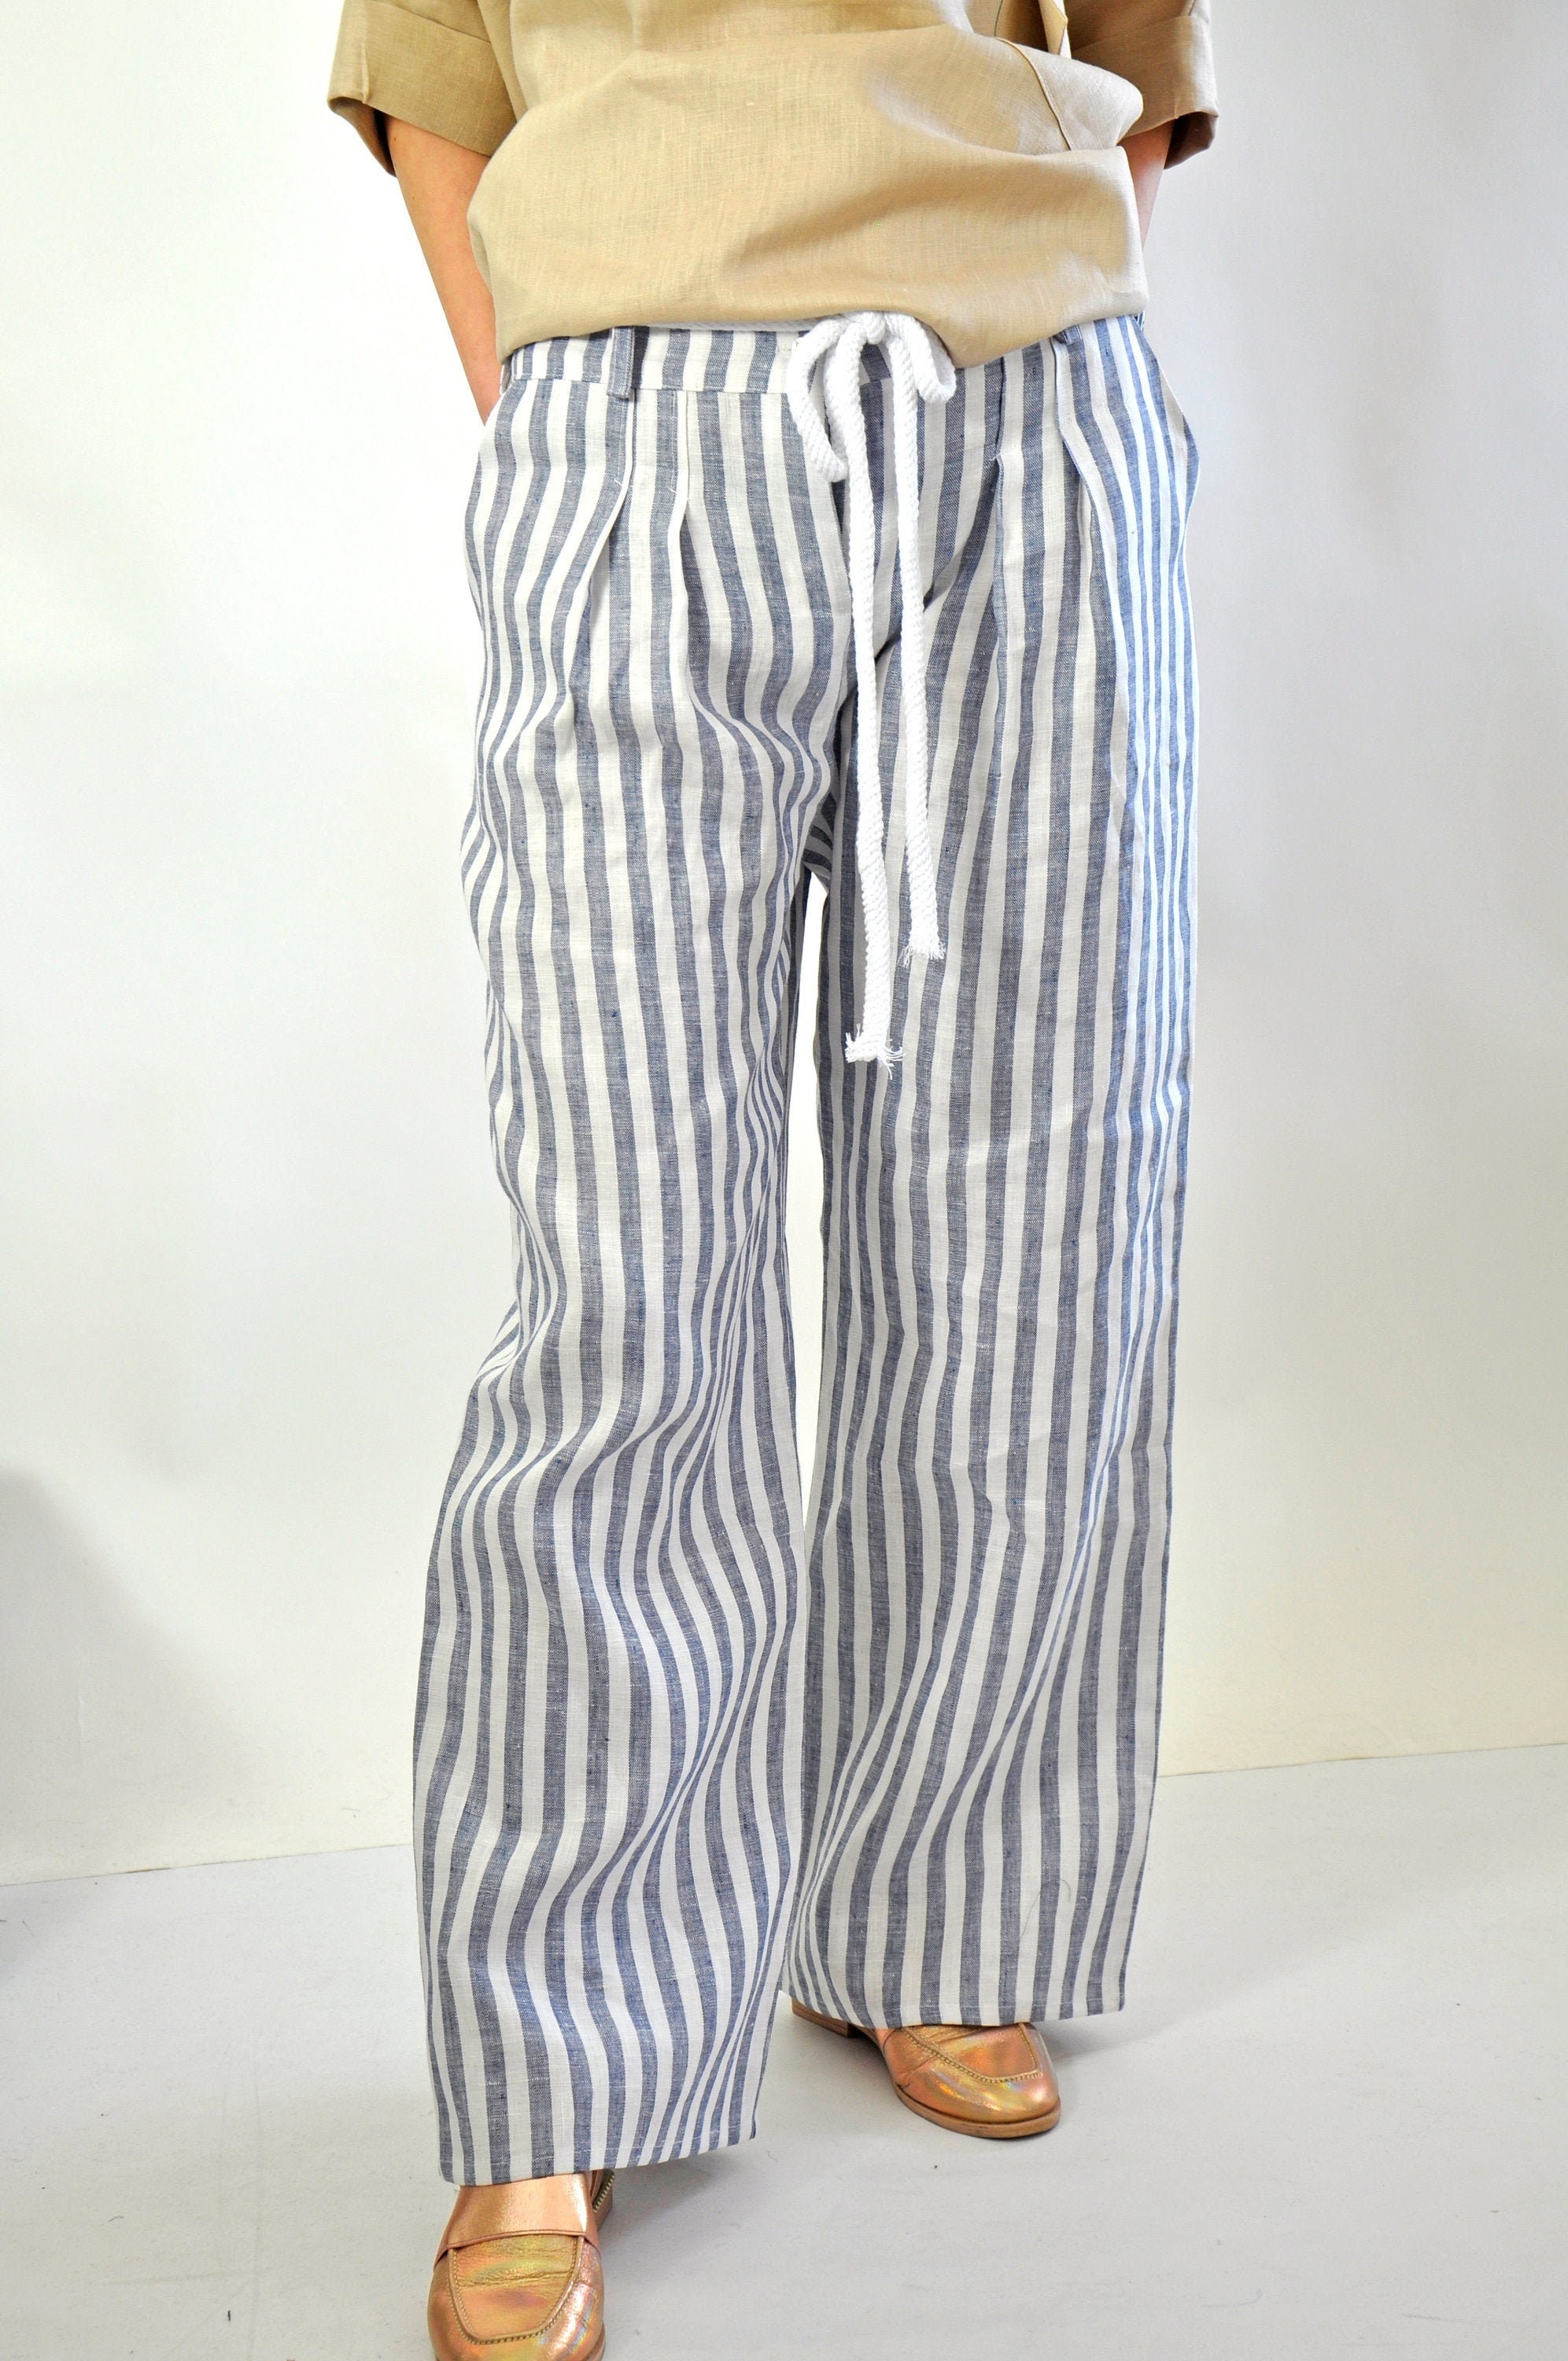 Wide Legged Linen Trousers With Belt and Pockets, High Waisted Pants,  Summer Palazzo Pants, Beach Pants for Women, Striped Pants for Ladies -   Canada